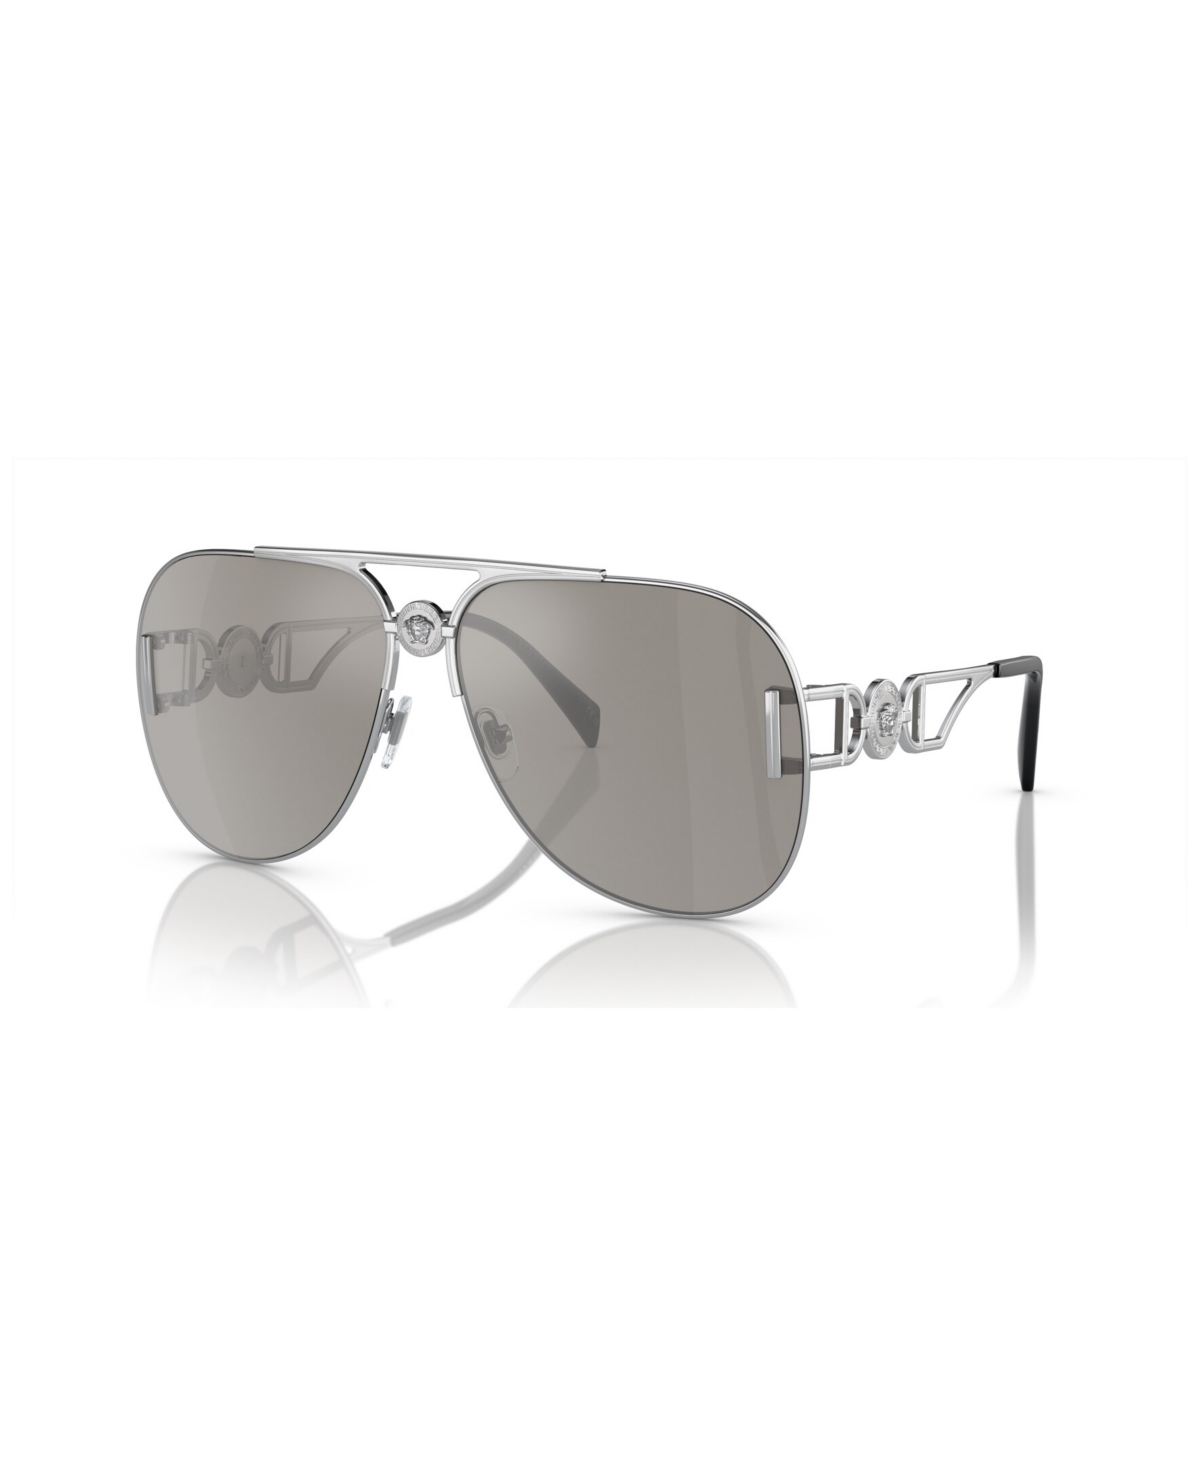 Versace Unisex Sunglasses, Mirror Ve2255 In Silver/gray Mirrored Solid